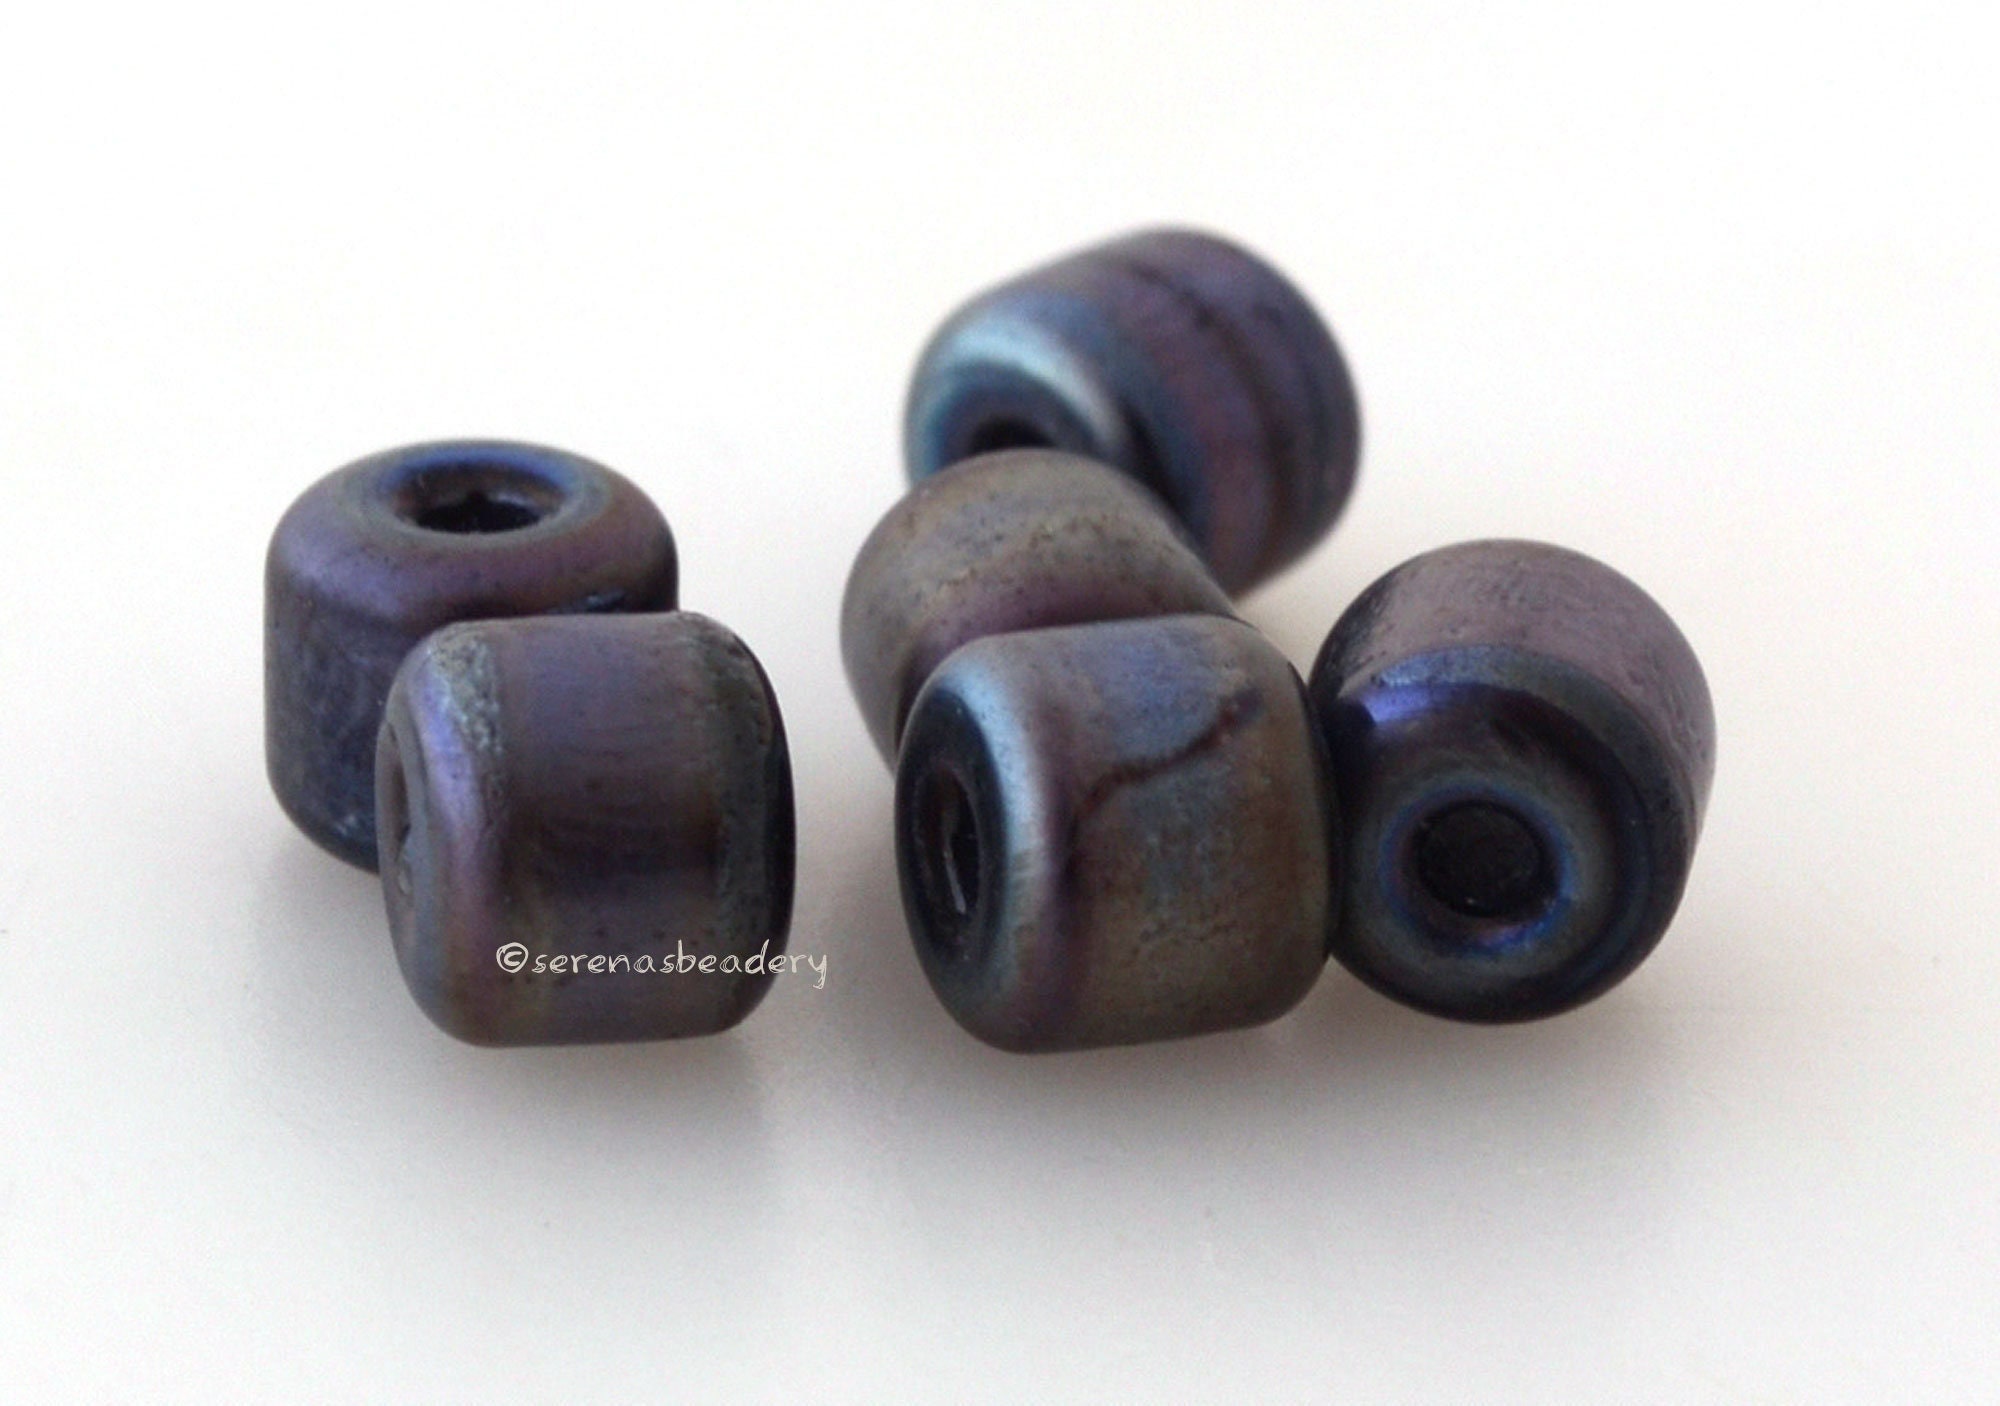 Black Disc Lampwork Beads For Jewelry Sets, Glass Beads Steampunk Jewelry,  Beads For Boho Bracelet, Black Beads For Jewelry Making, Chunky